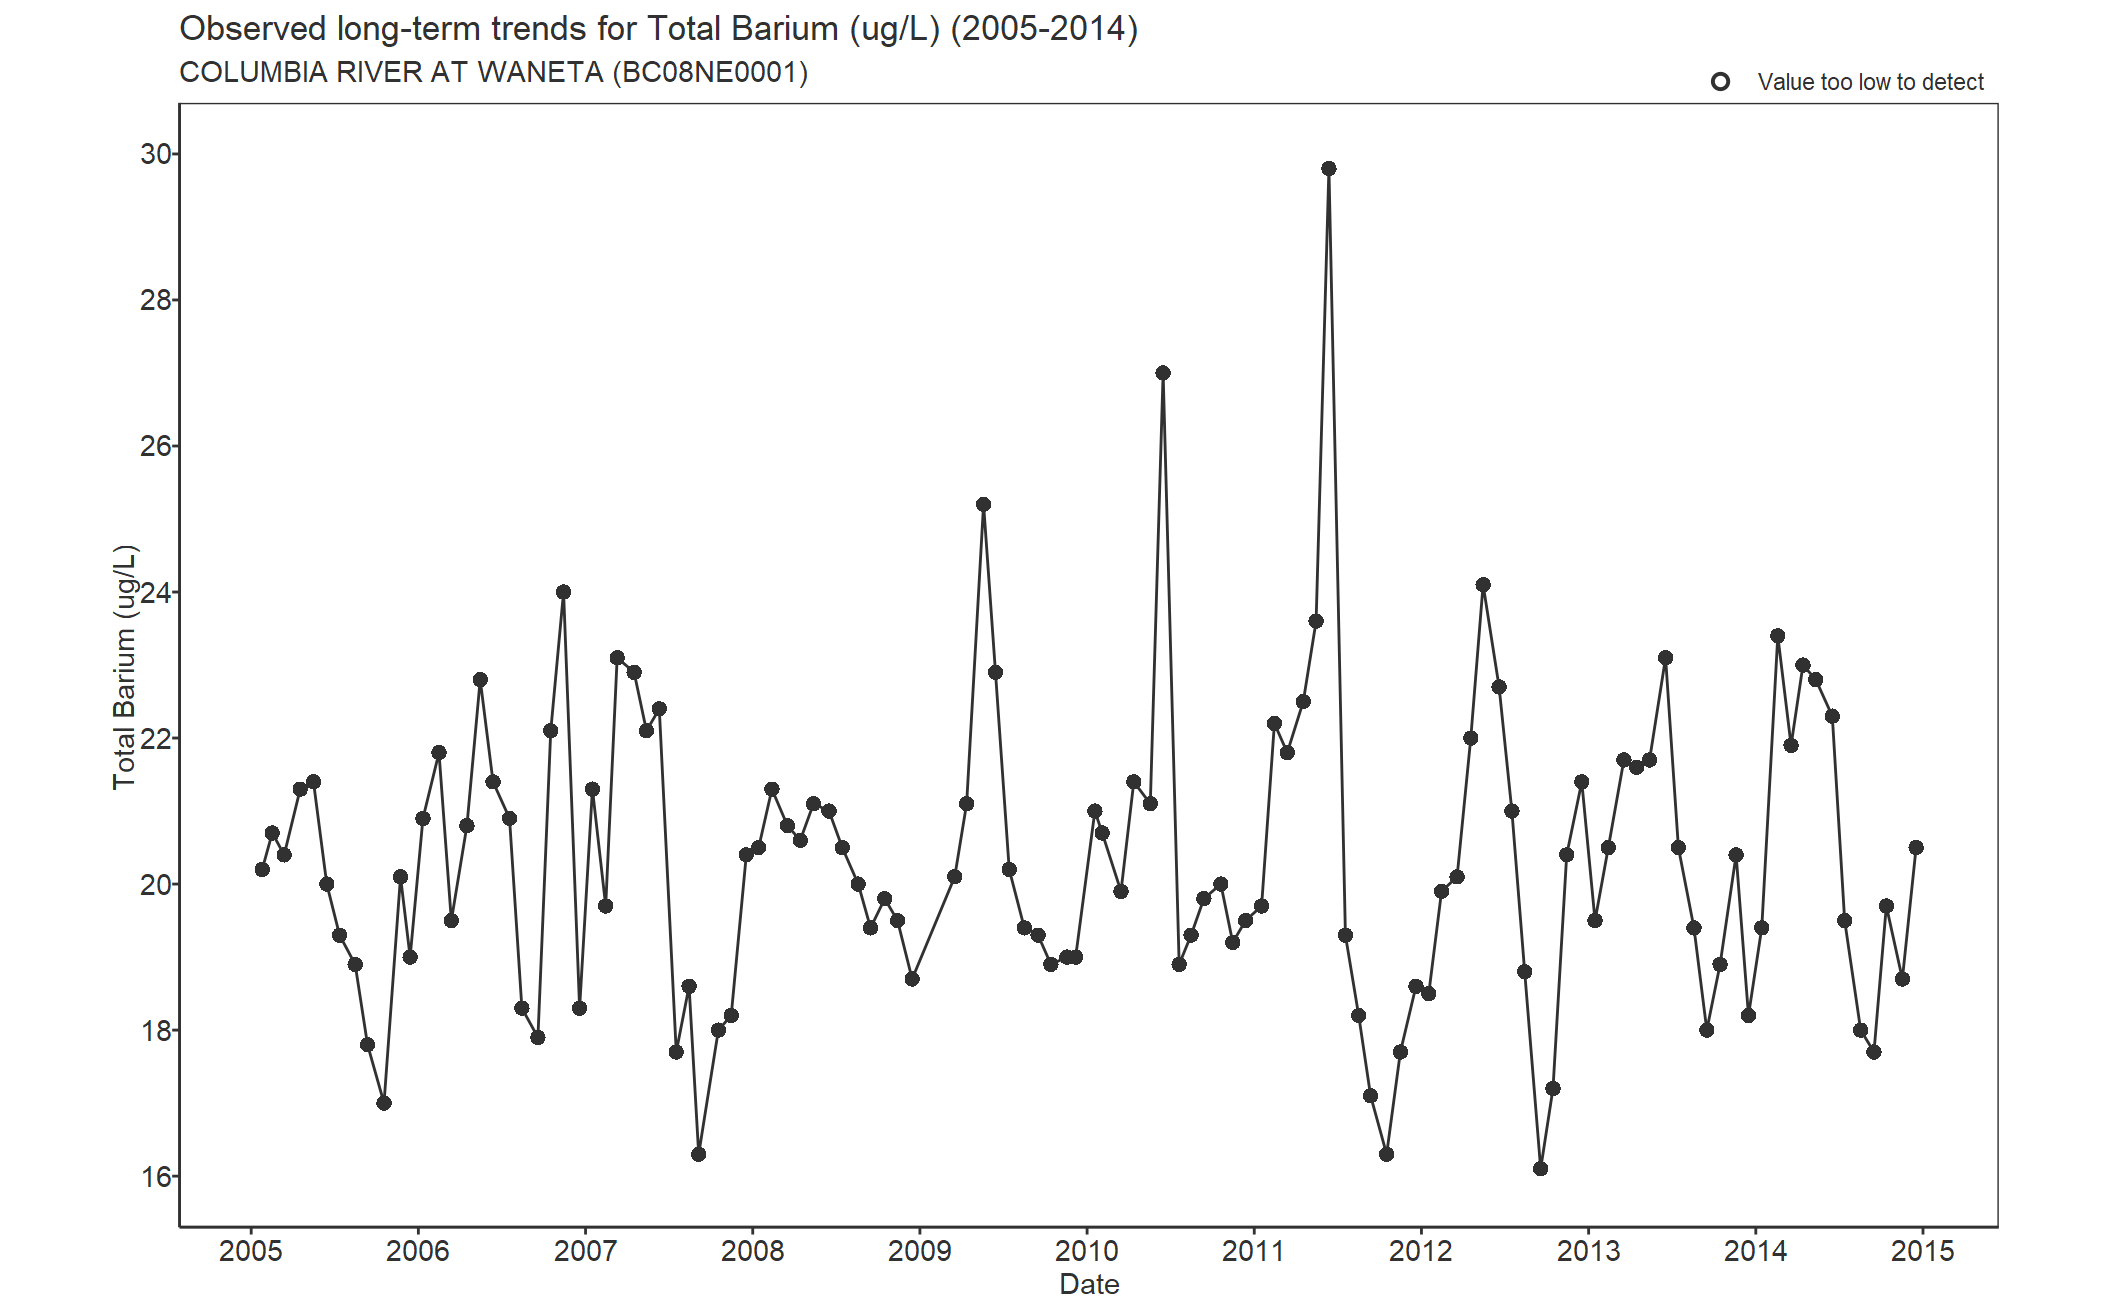 Observed long-term trends for Barium Total (2005-2014)